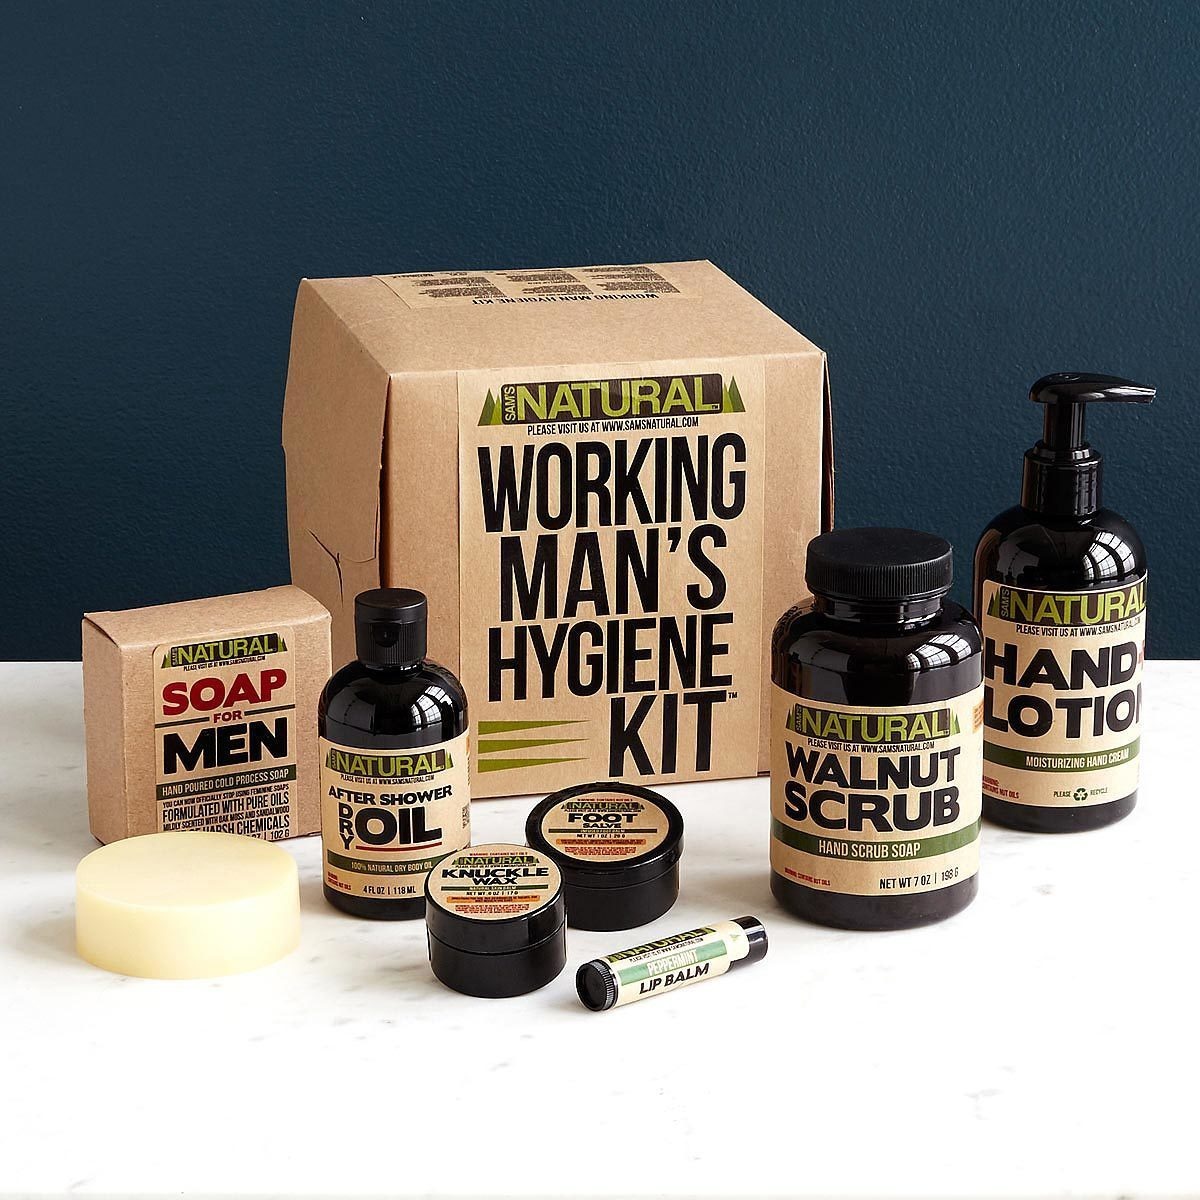 This Working Man's Hygiene Kit is a gift to the entire family.